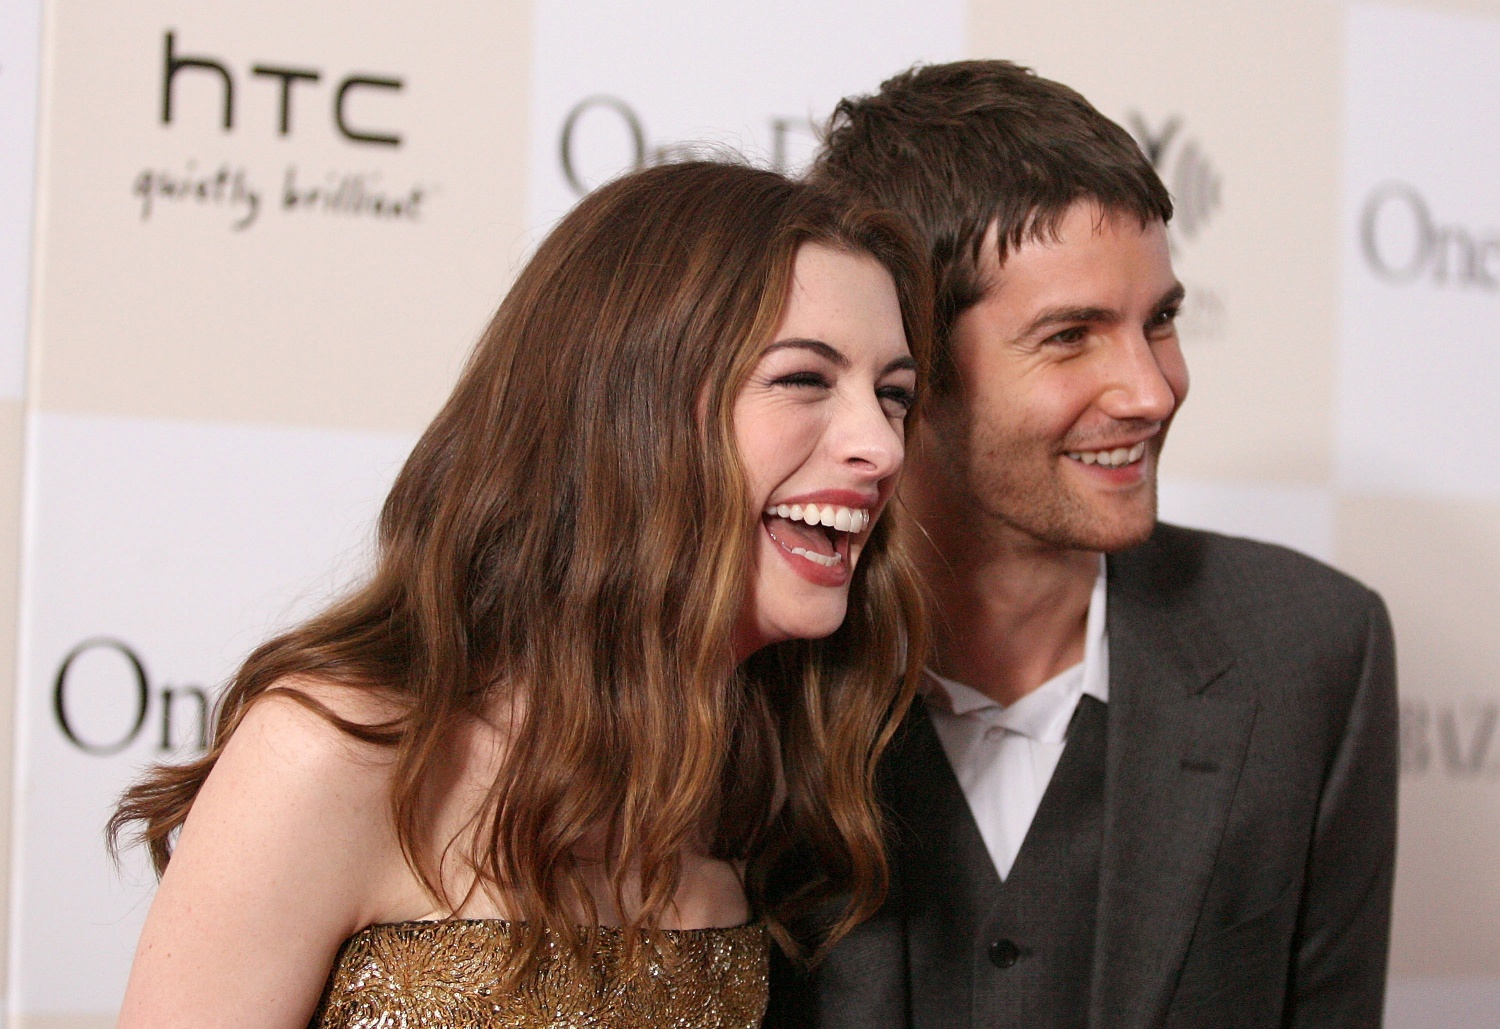 Actors Anne Hathaway and Jim Sturgess attend the "One Day" premiere at the AMC Loews Lincoln Square 13 theater on August 8, 2011 in New York City.